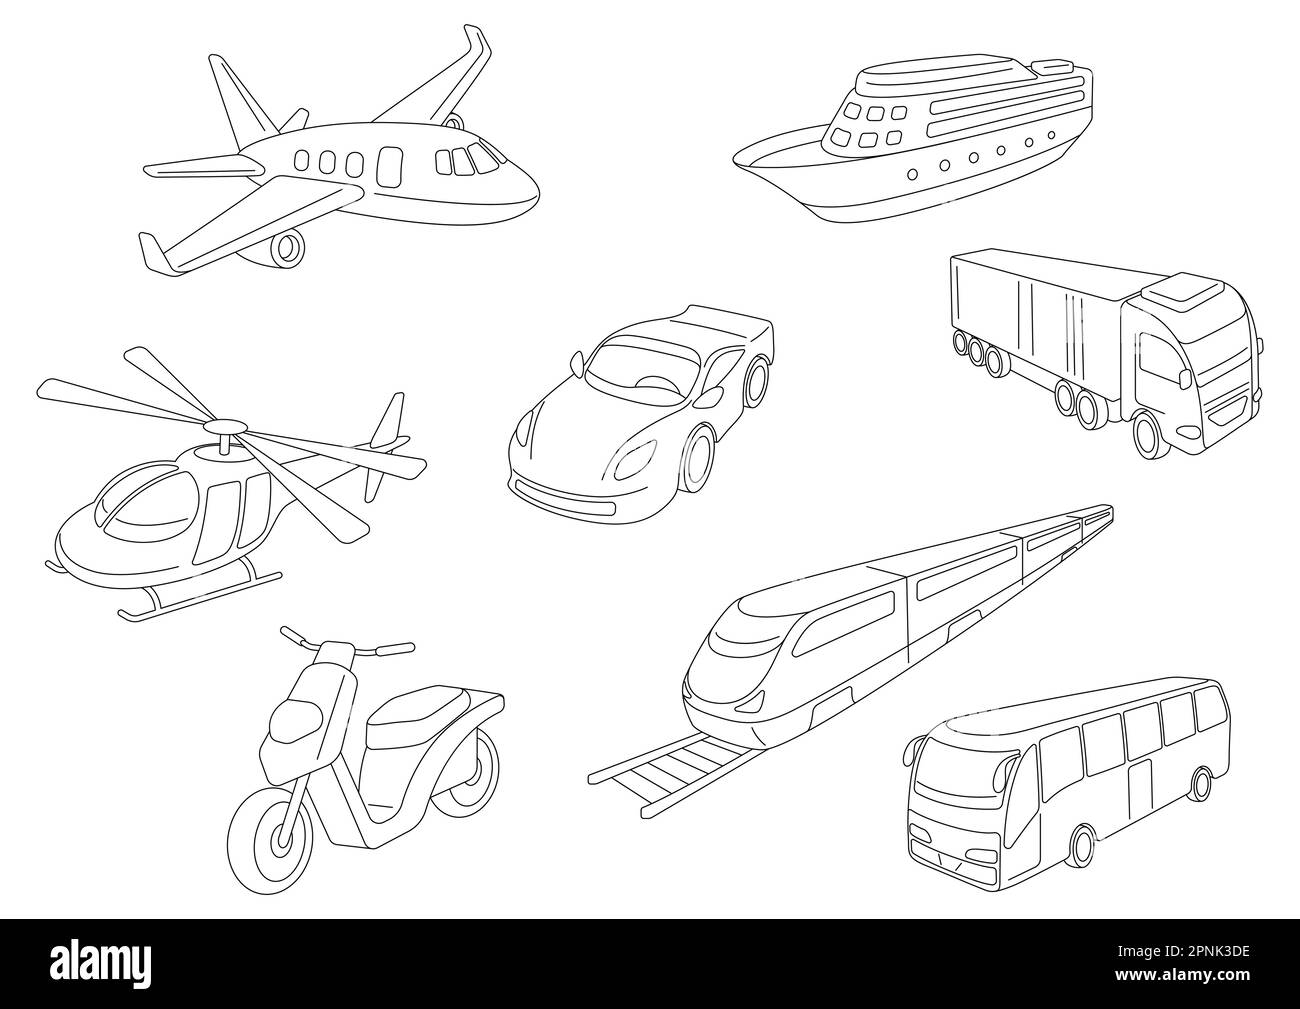 Transportation set of objects. Business or industrial images. Stock Vector